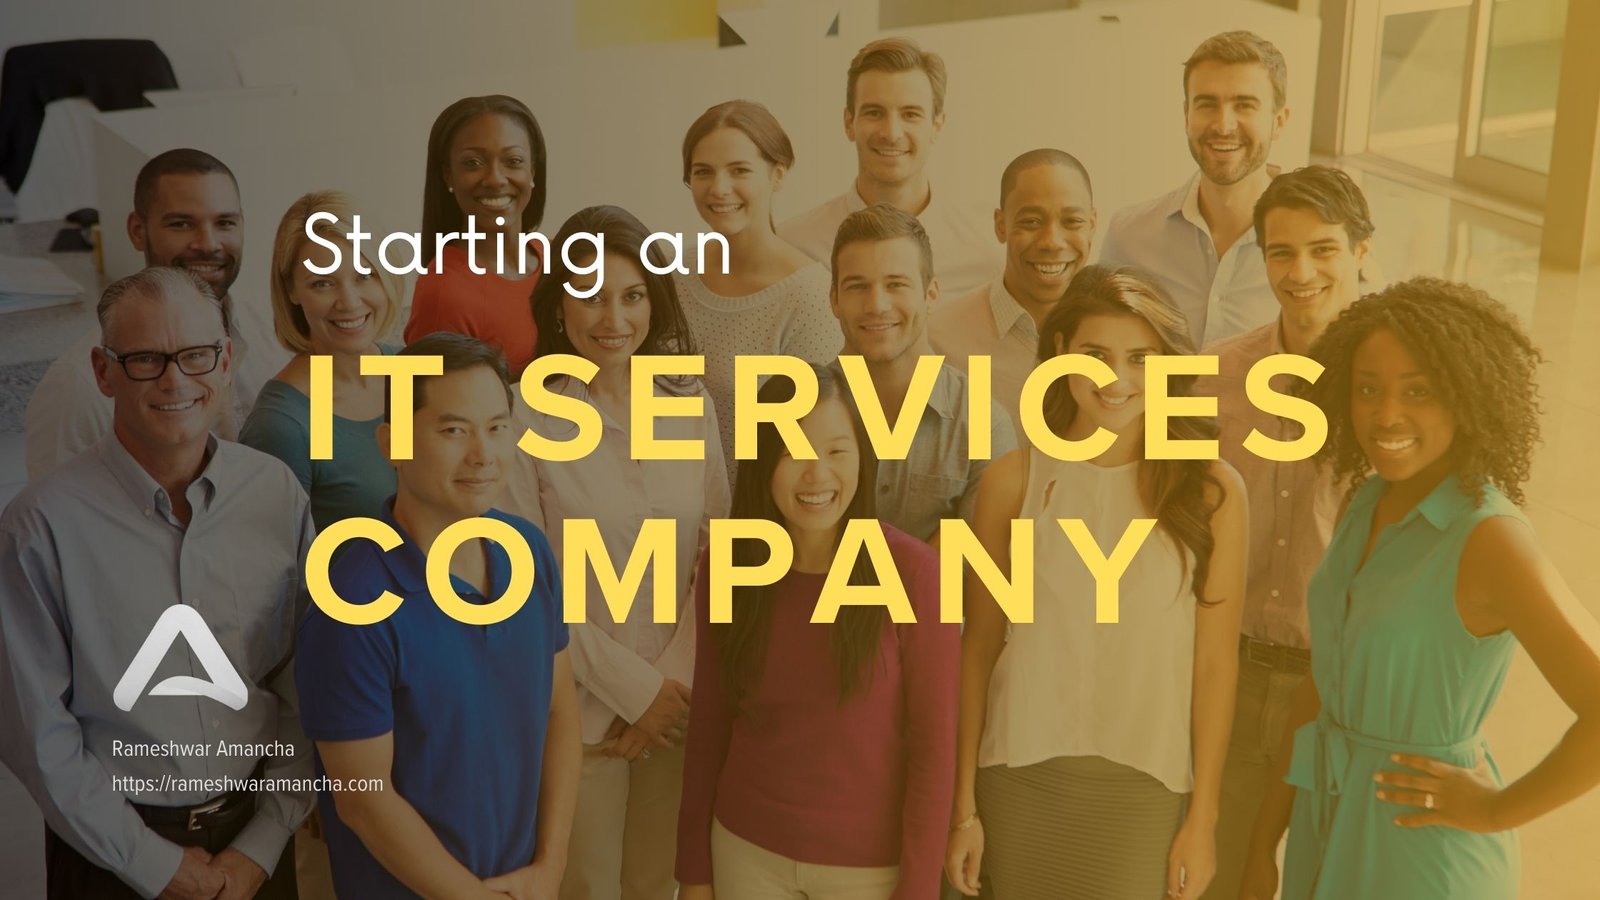 Starting an IT Services Company